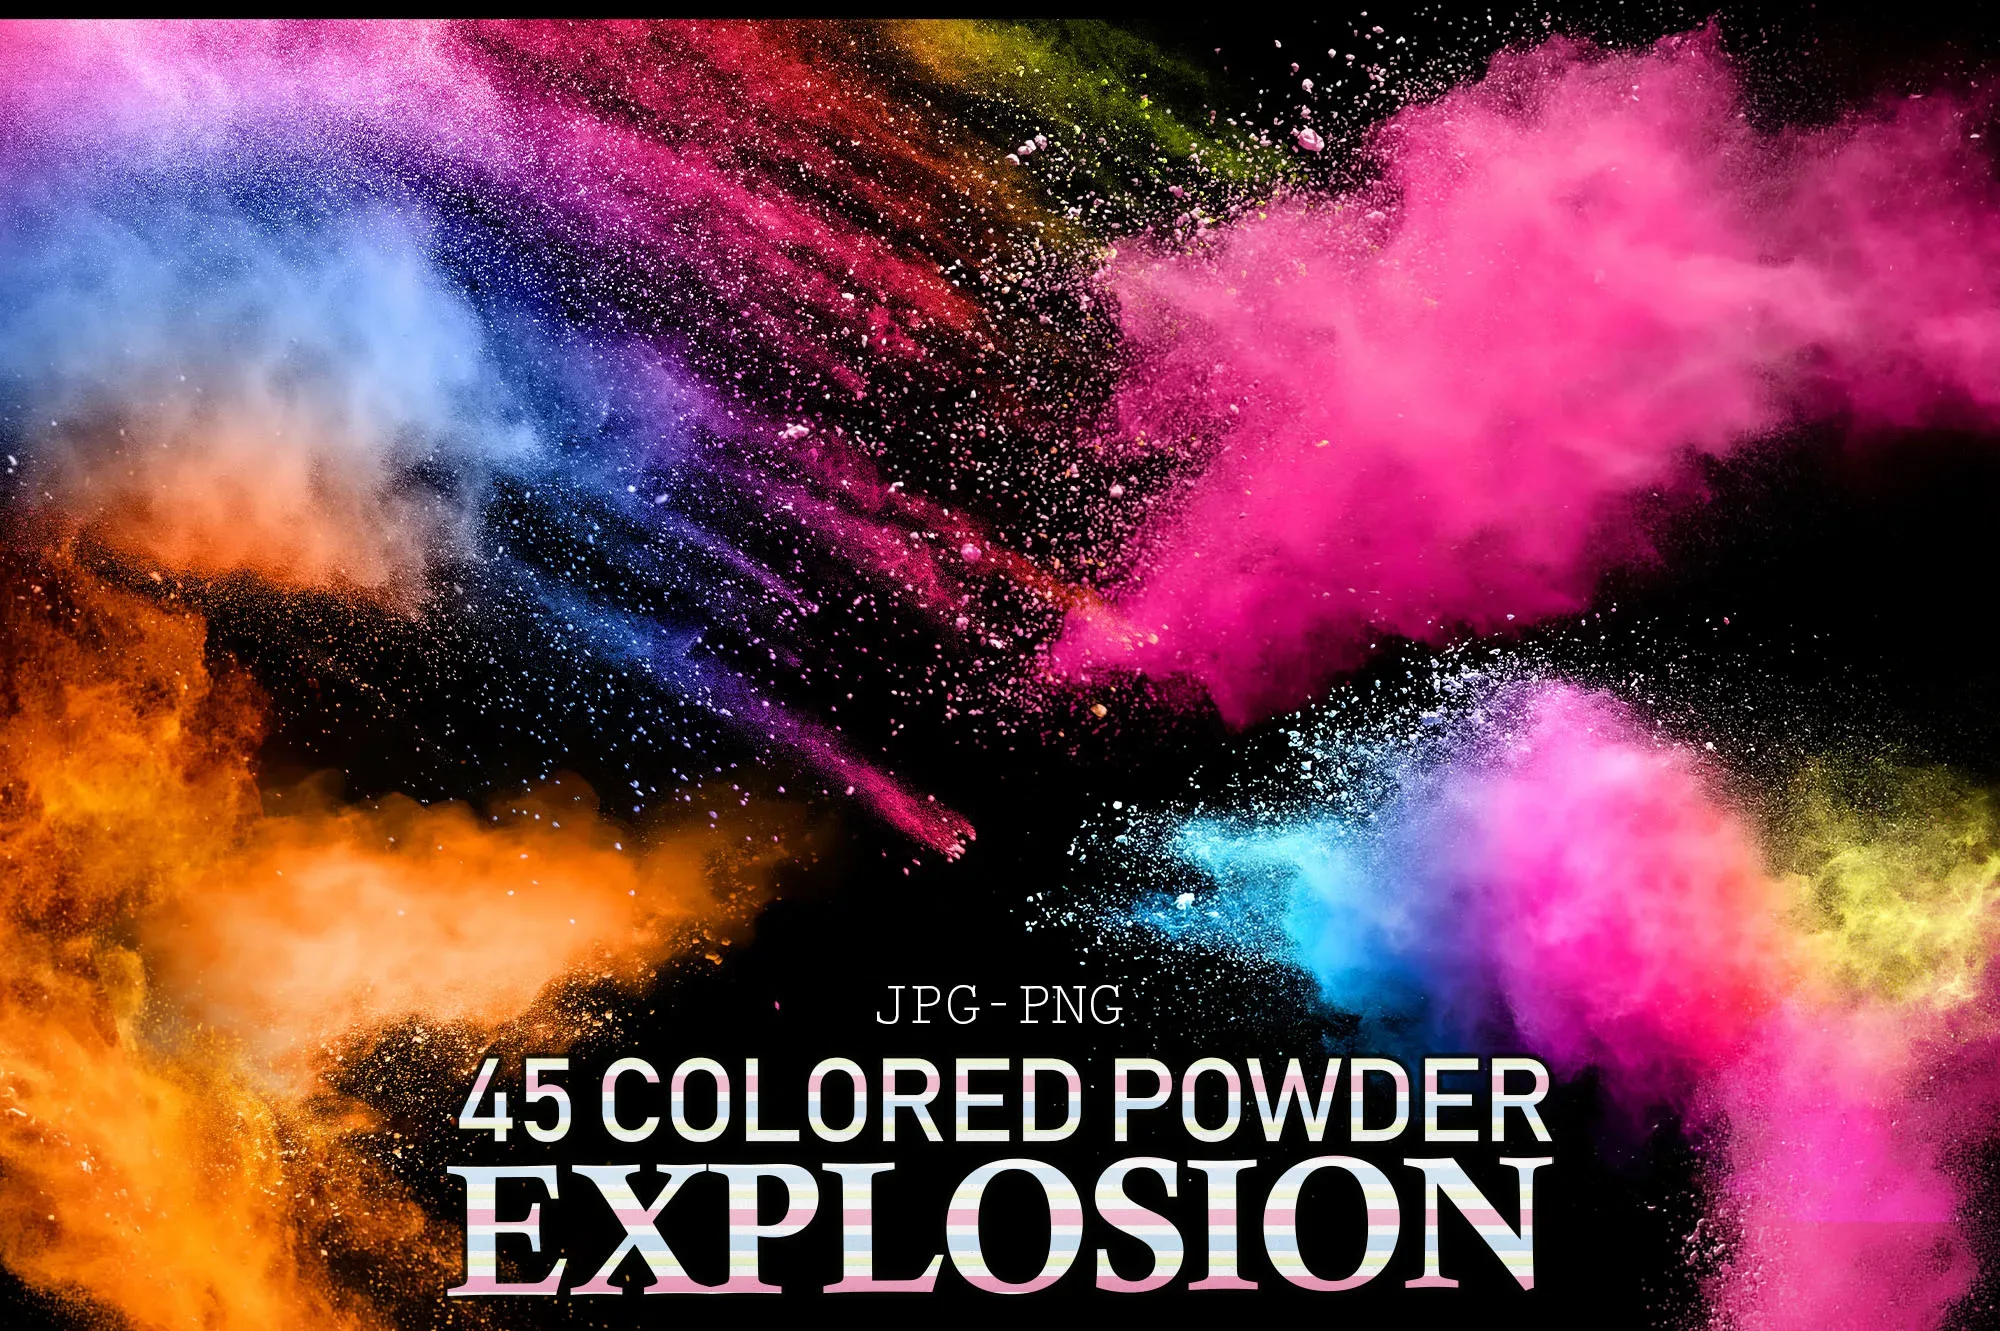 45 Explosion of Colored Powder, Holy Powder Texture Rainbow Explosion Textures colored Abstract Art Digital Paper Backgrounds blowing powder